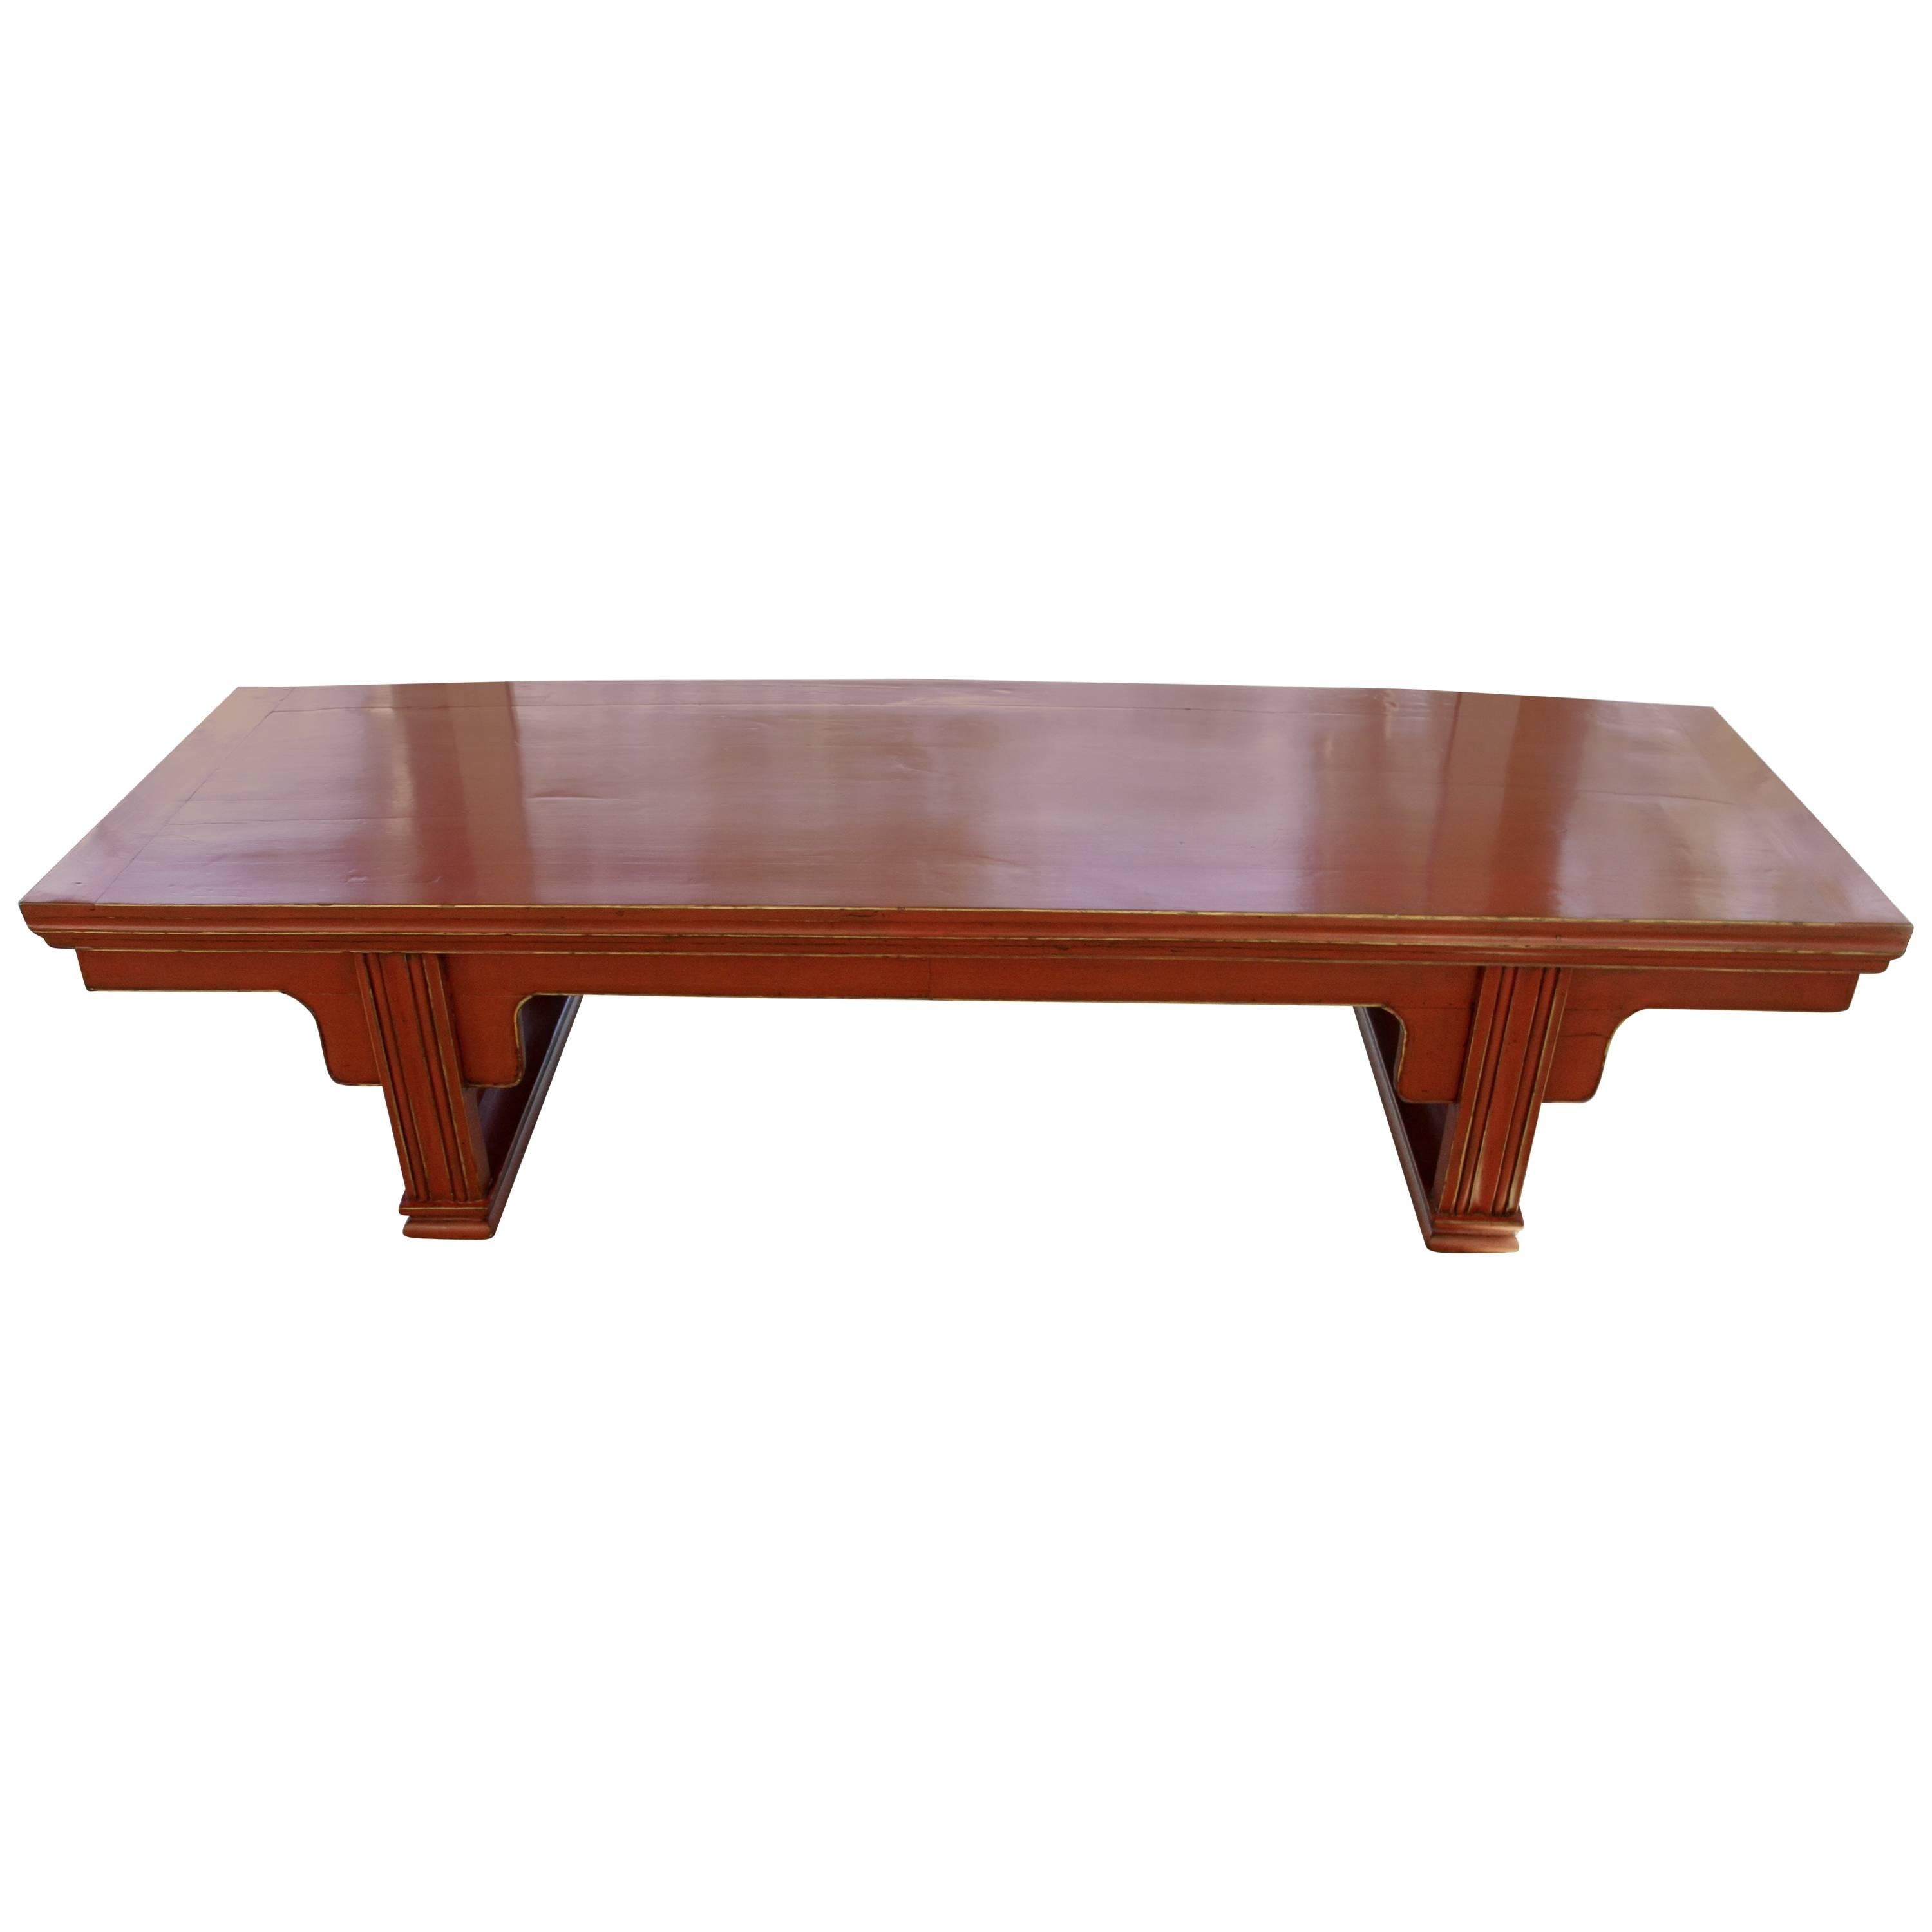 Red Lacquer Bench Chinese Low Table Bench China Elmwood For Sale